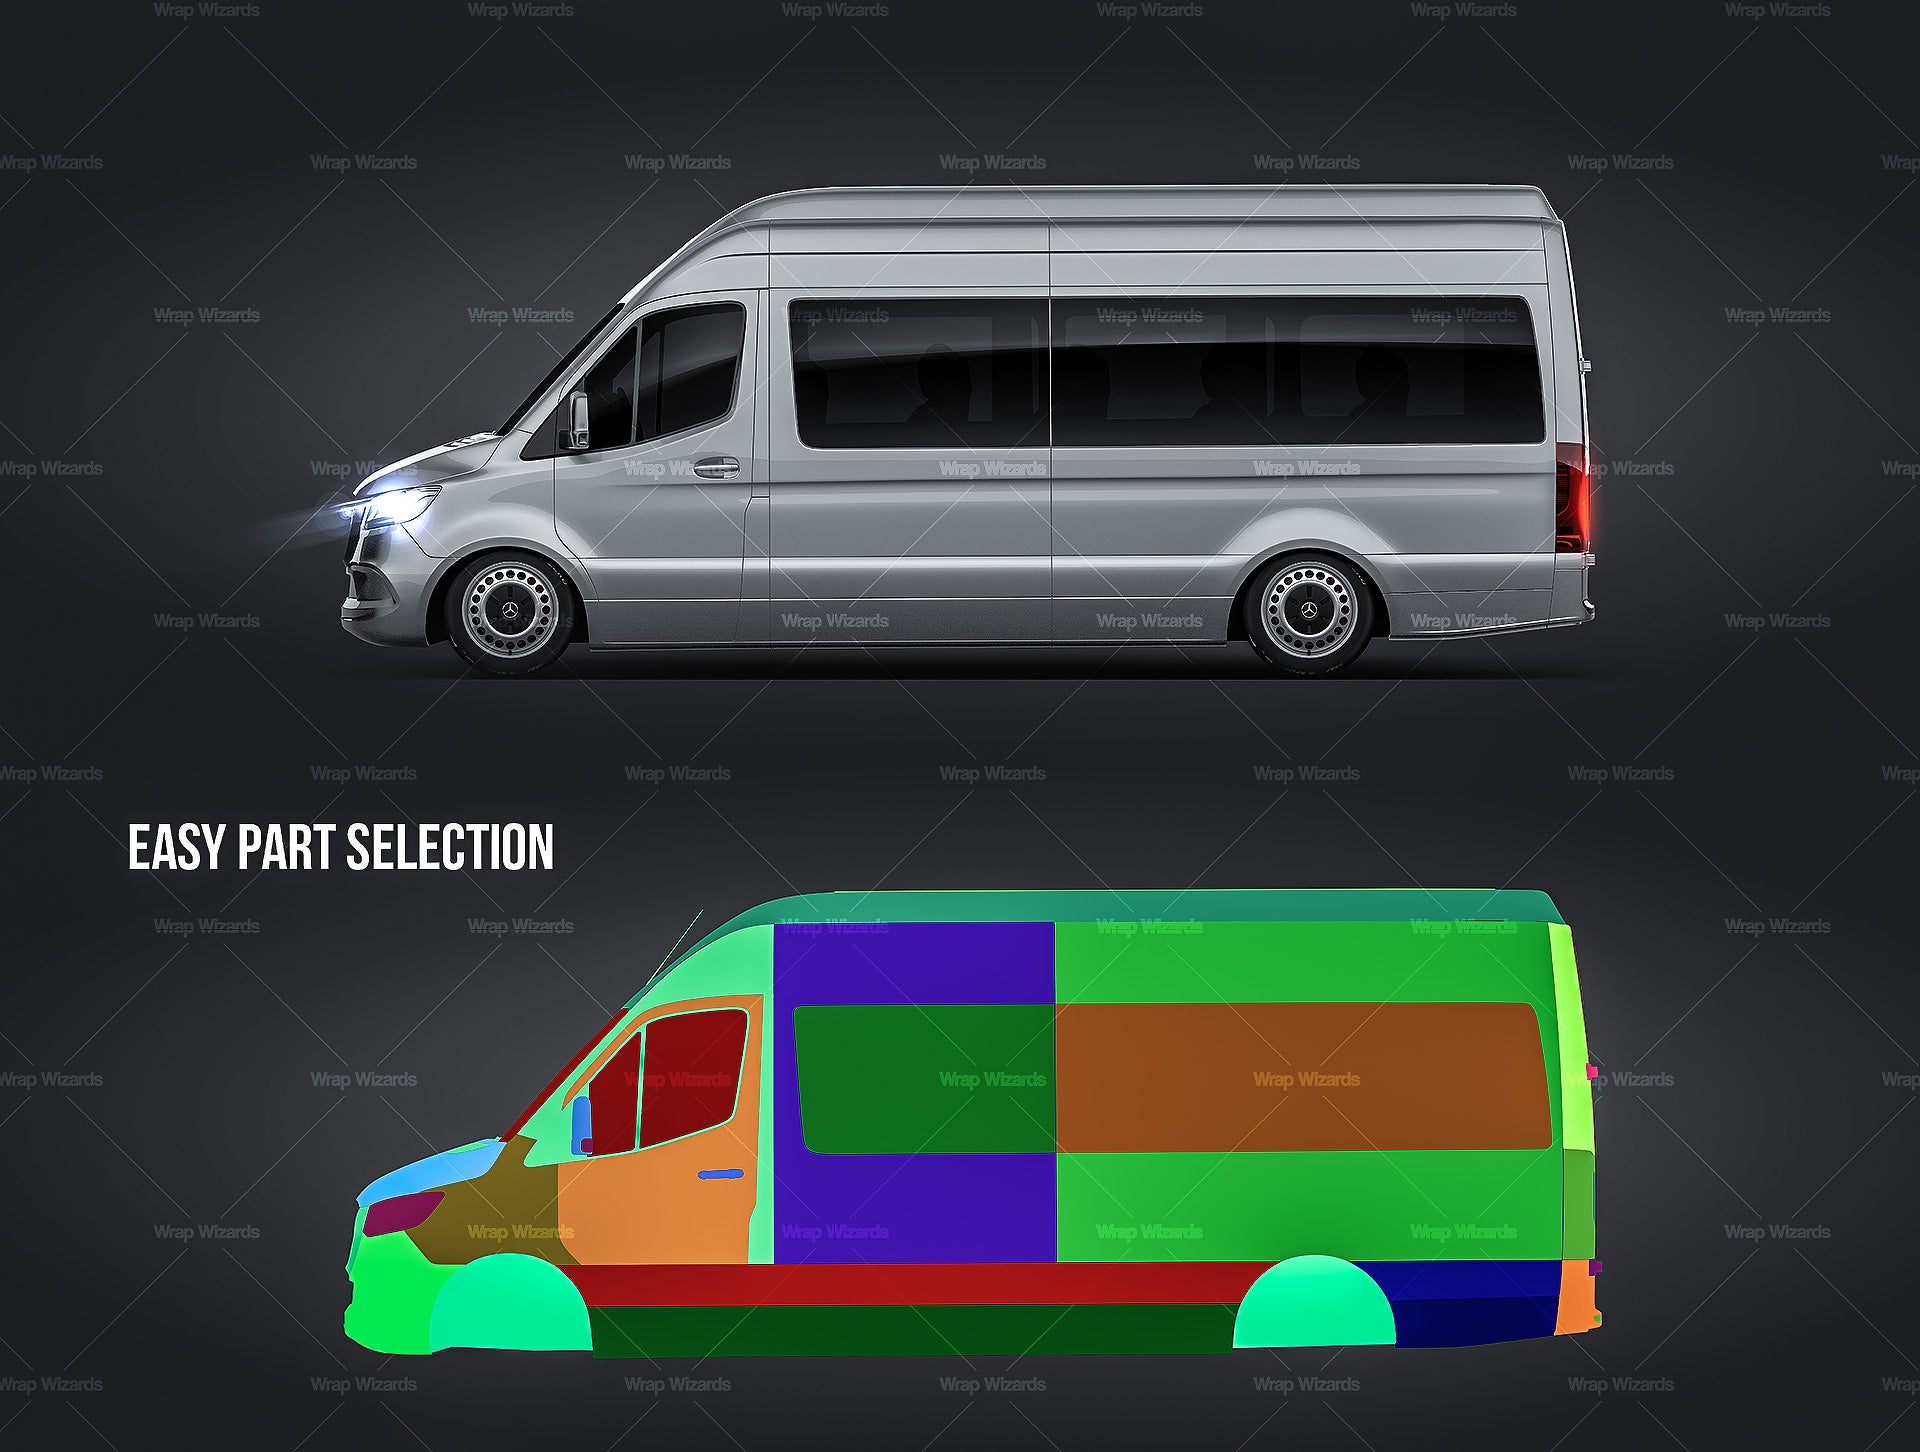 Mercedes Benz Sprinter panel/passenger van L3H3 with optional windows glossy finish - all sides Car Mockup Template.psd